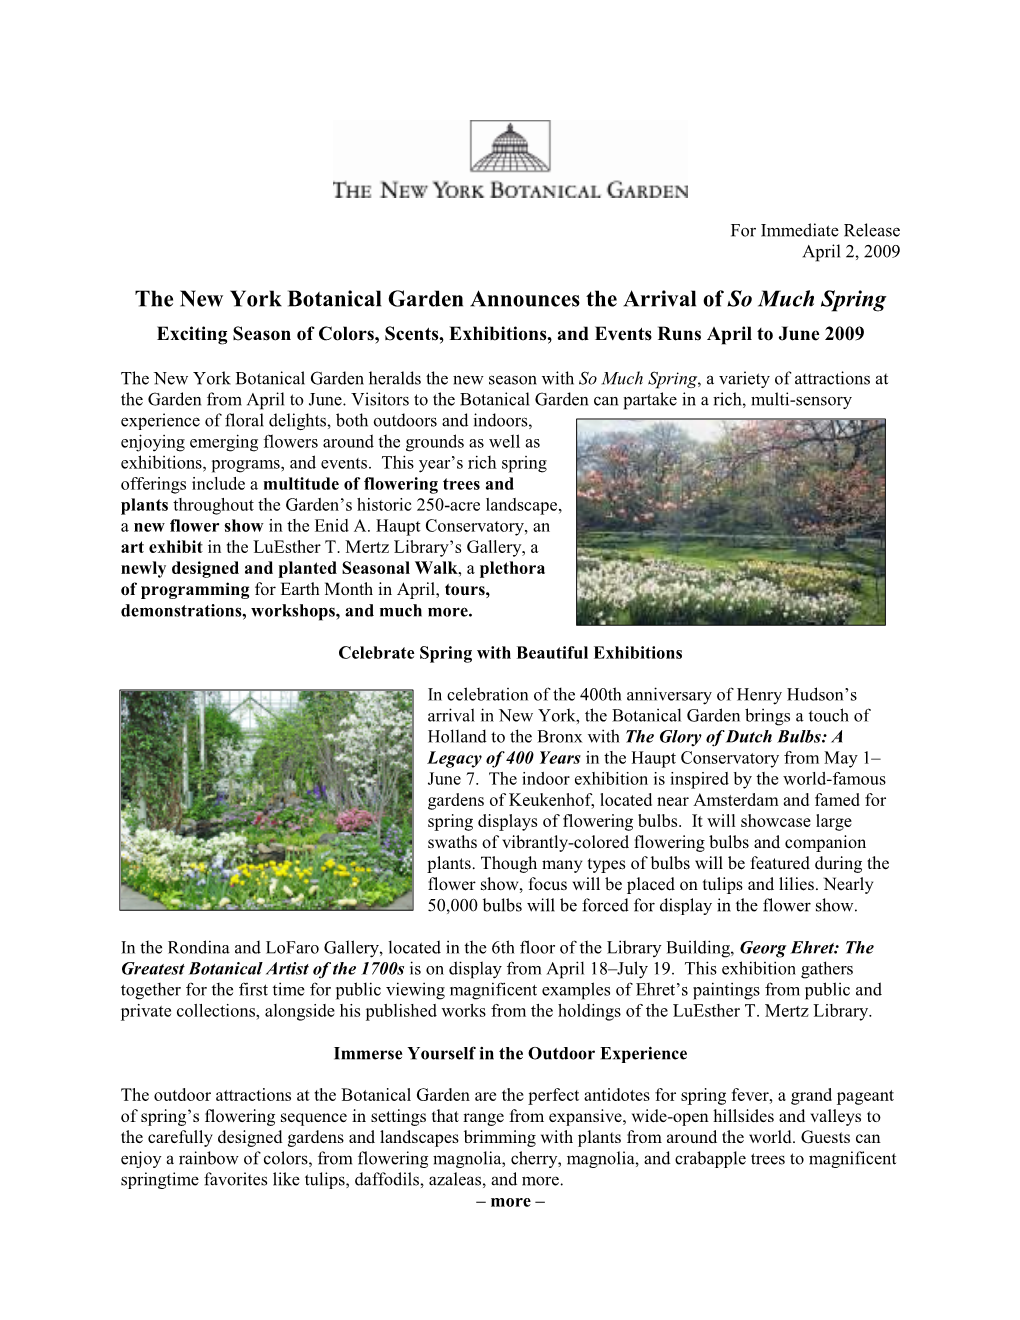 The New York Botanical Garden Announces the Arrival of So Much Spring Exciting Season of Colors, Scents, Exhibitions, and Events Runs April to June 2009